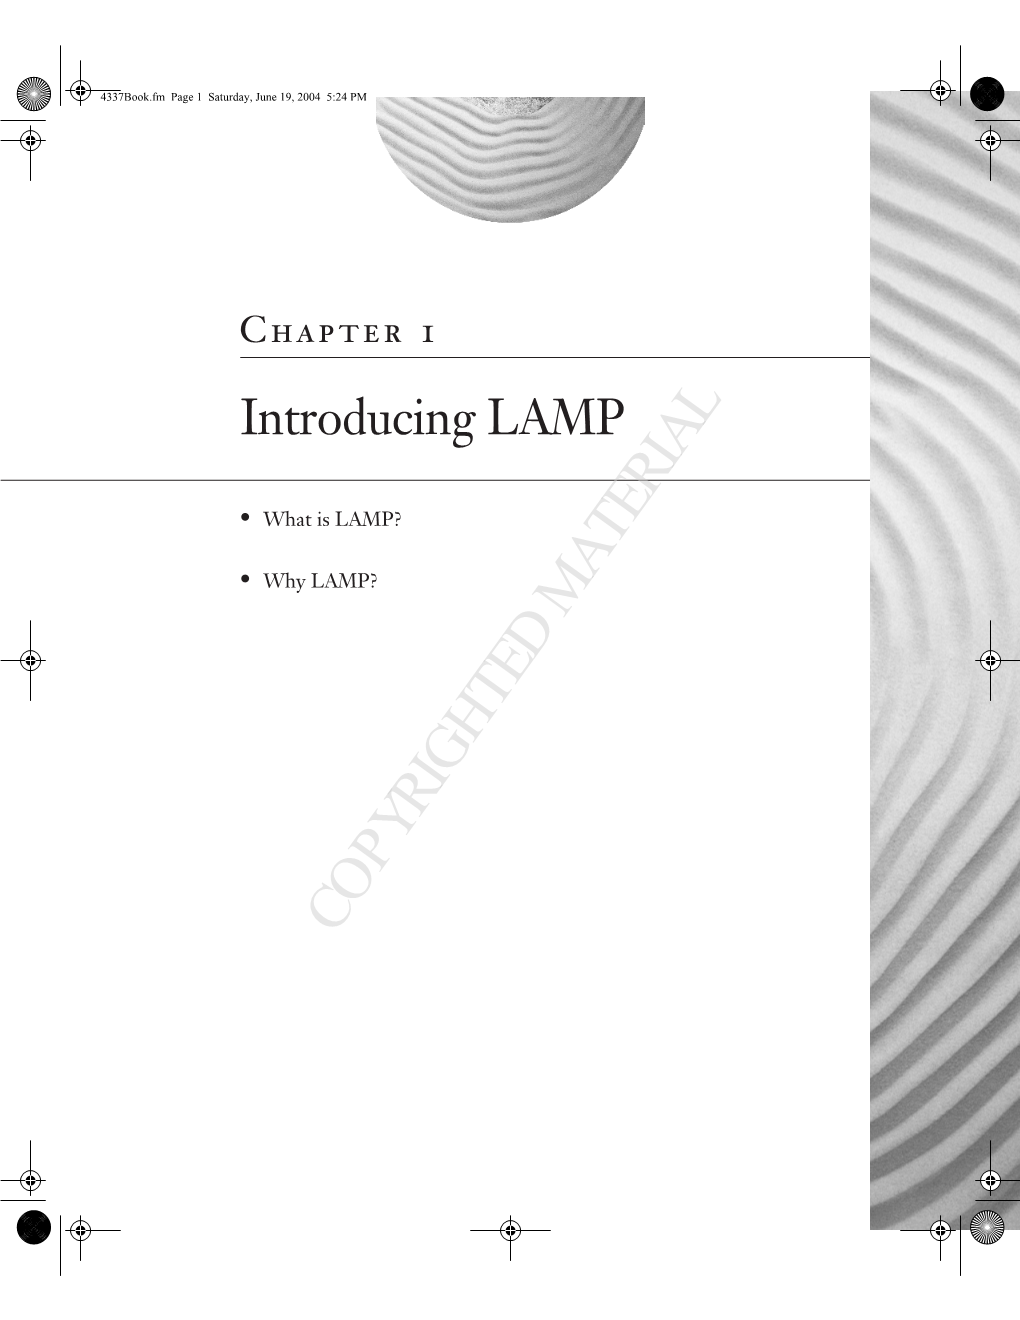 What Is LAMP?